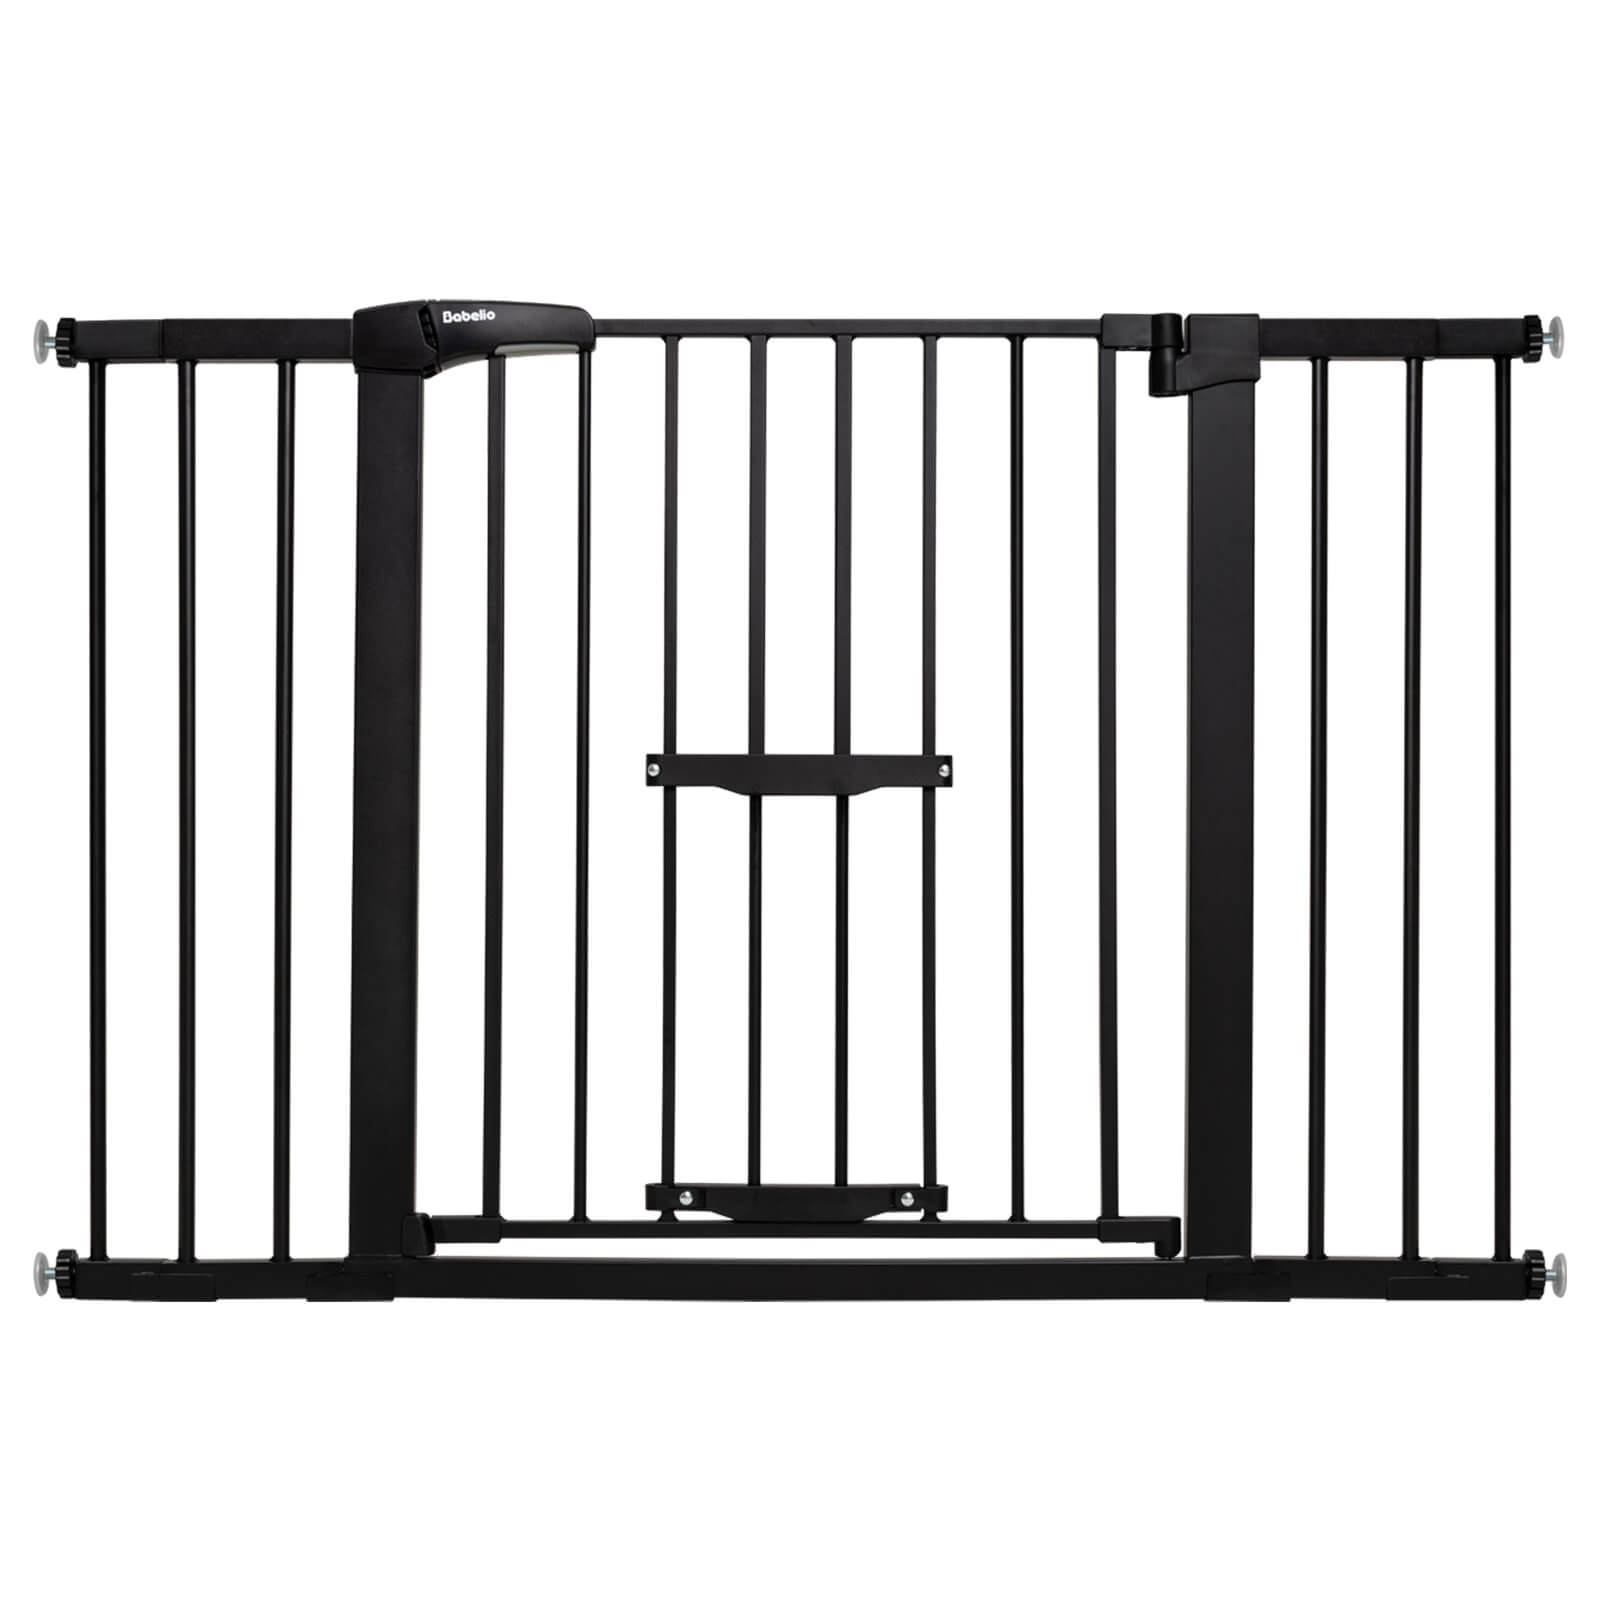 BABELIO Adjustable 29-48" Metal Baby Gate with Pet Door - Auto-Close, Dual-Swing Safety Gate for Stairs and Doorways